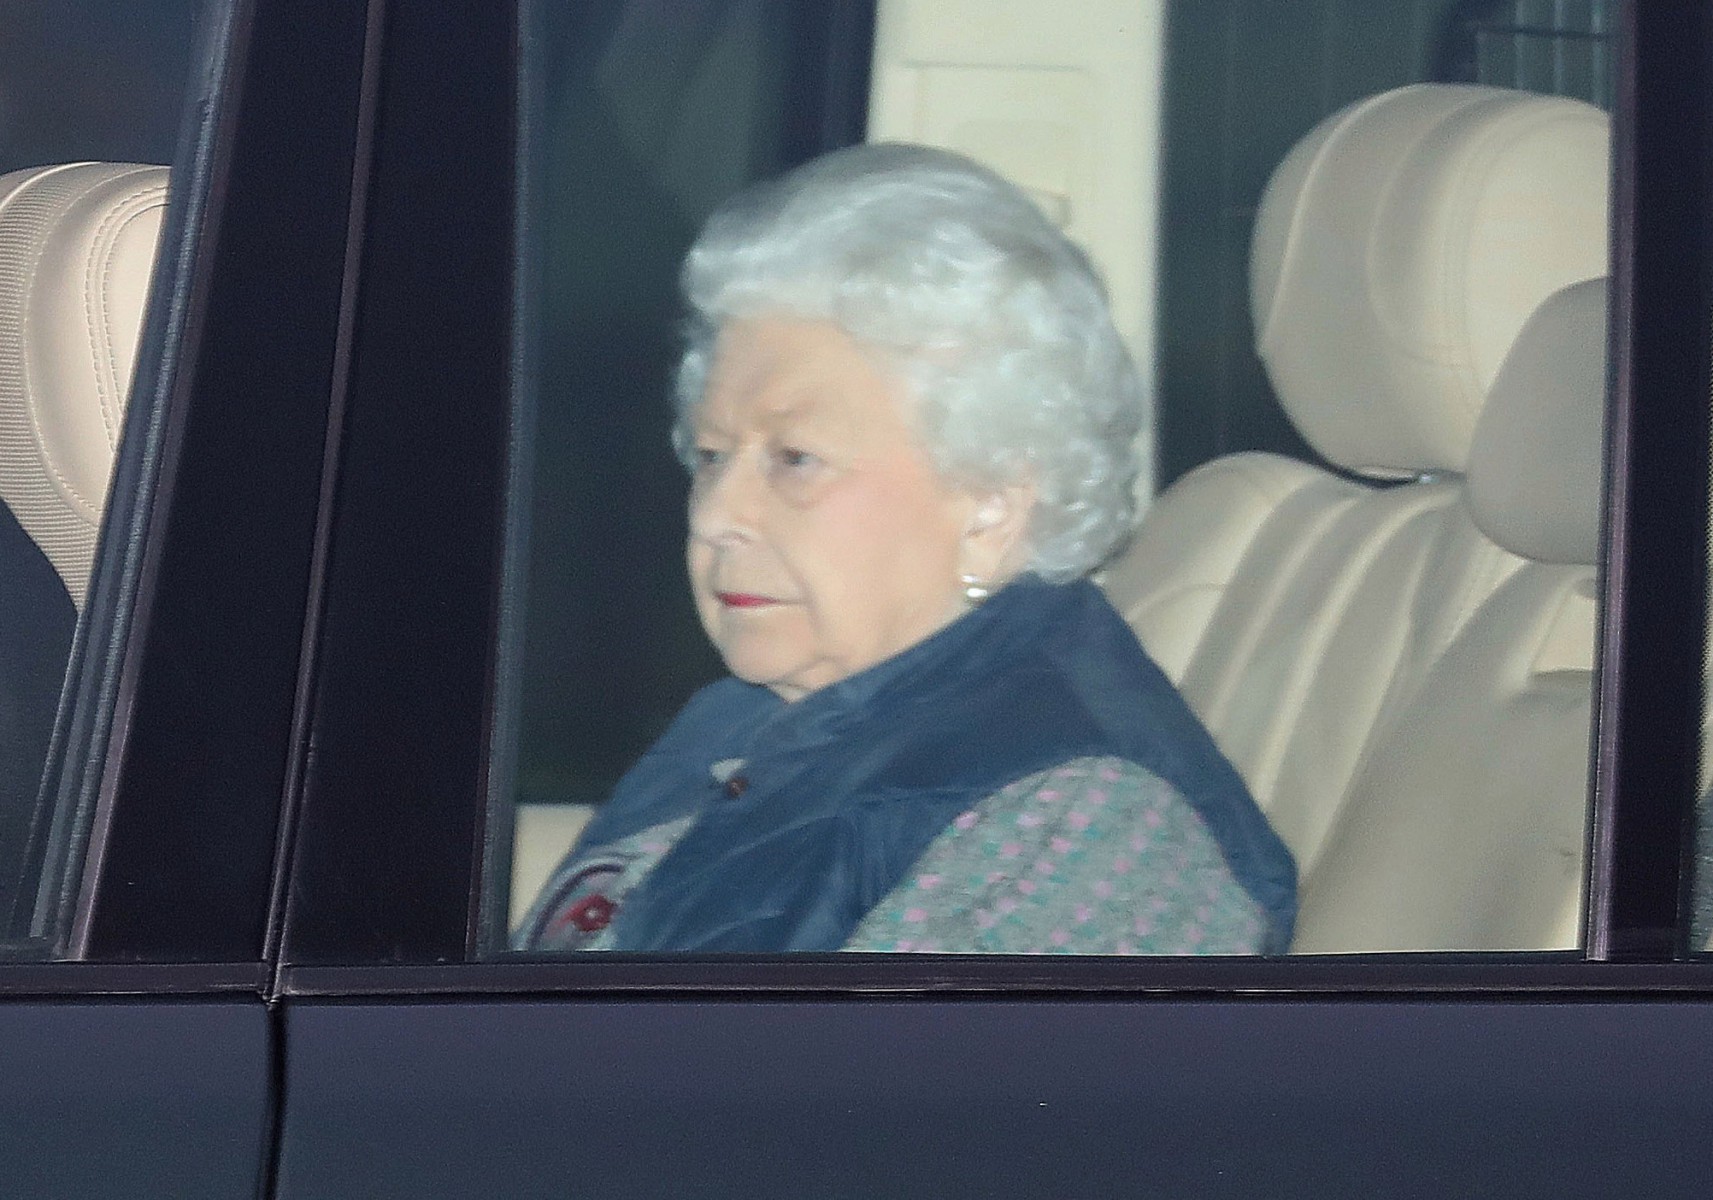  The Queen returns to Windsor Castle from Buckingham Palace after Prince Andrew visited her this morning